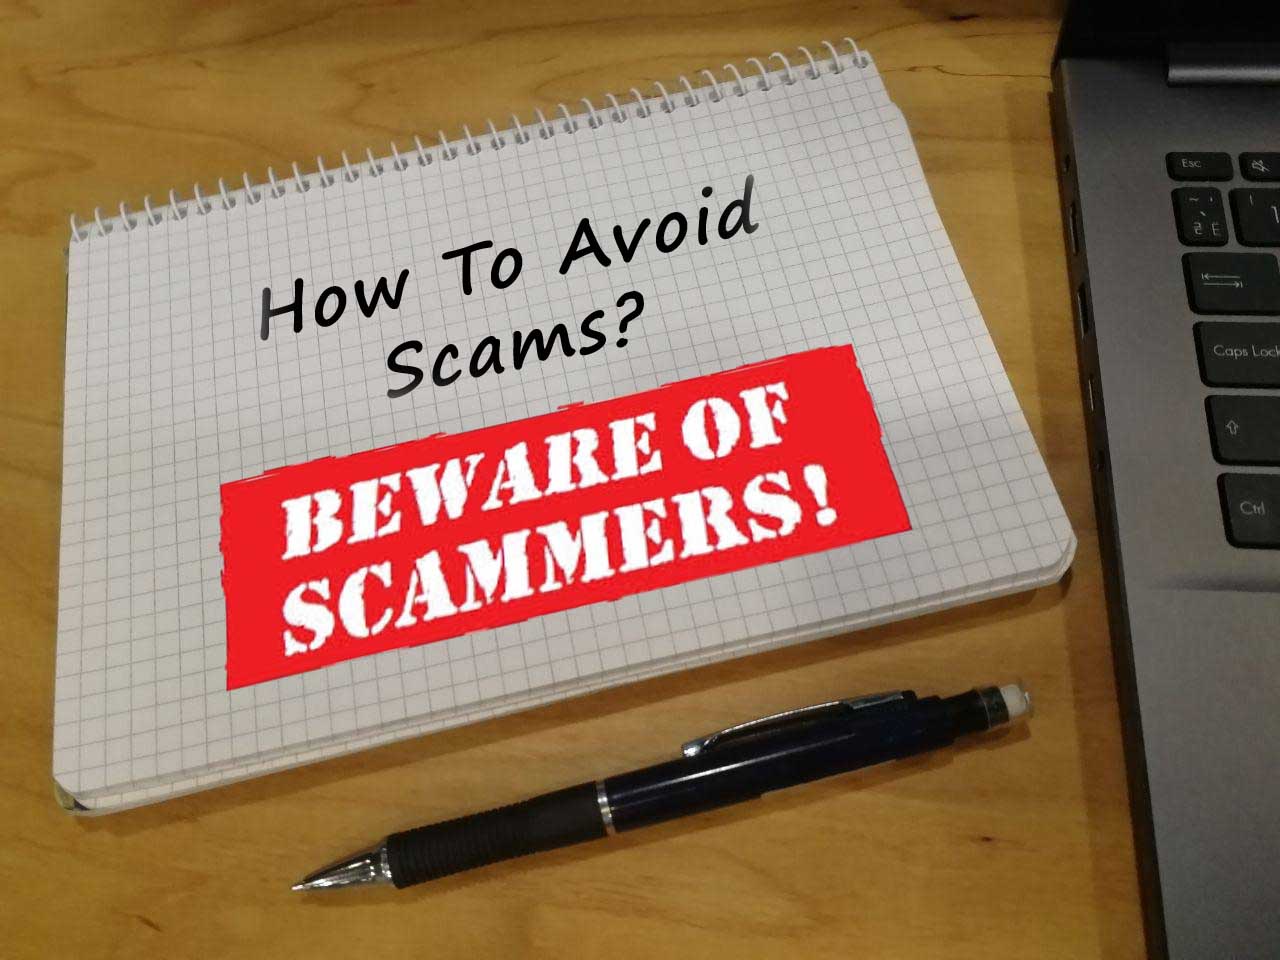 How to awoid scams?